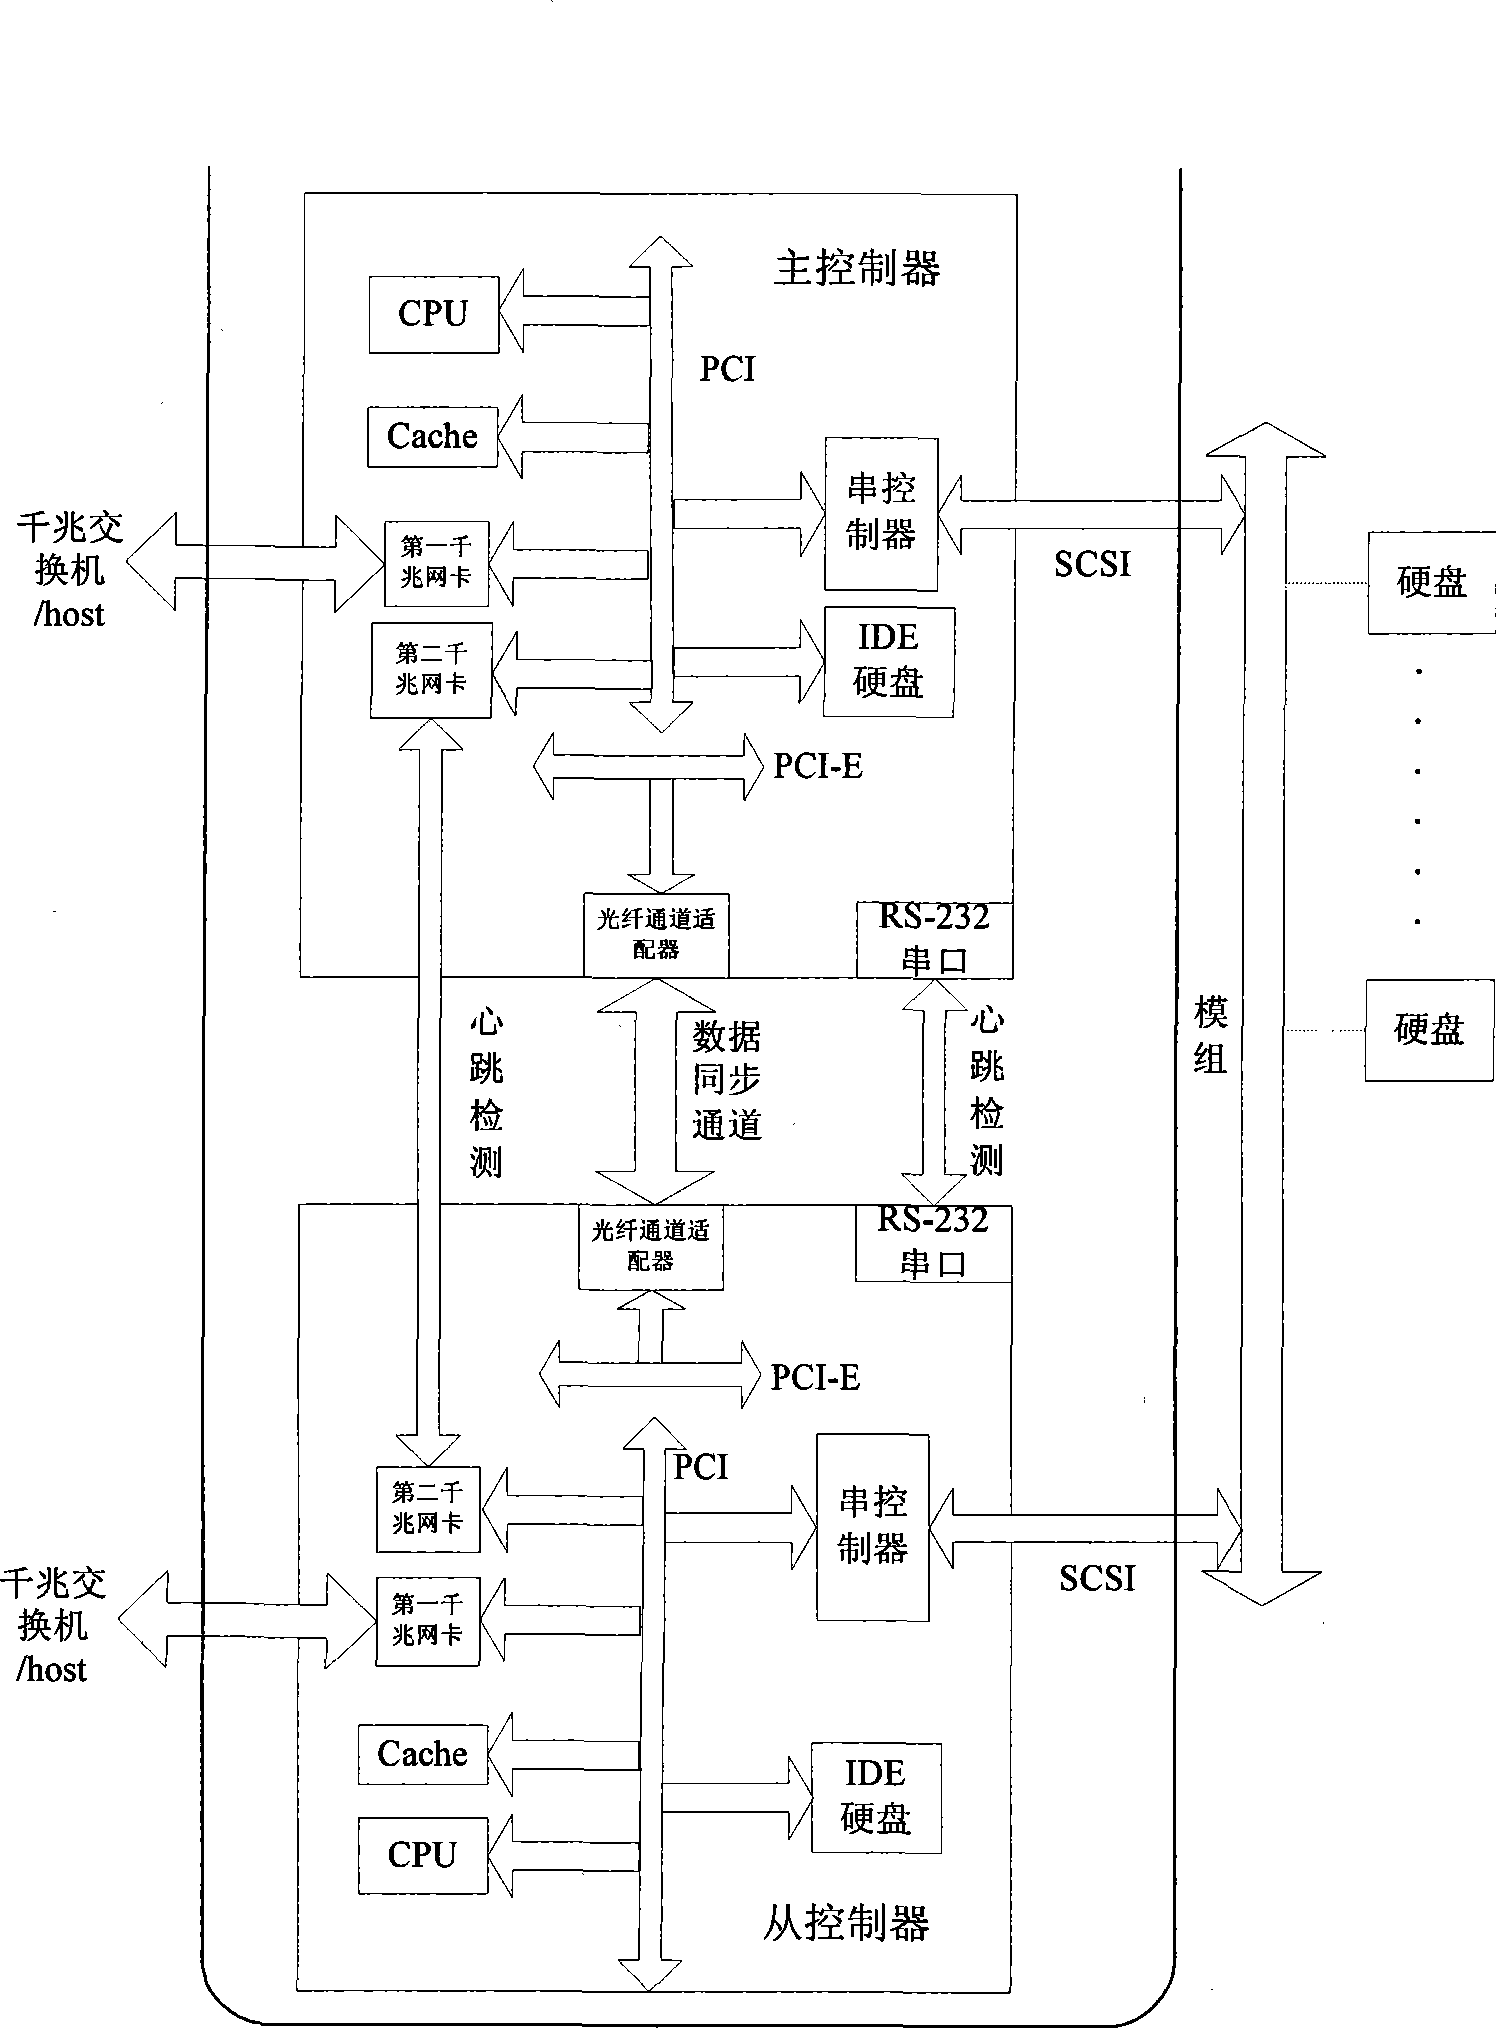 Dynamic fault detection system for dual controller disk array